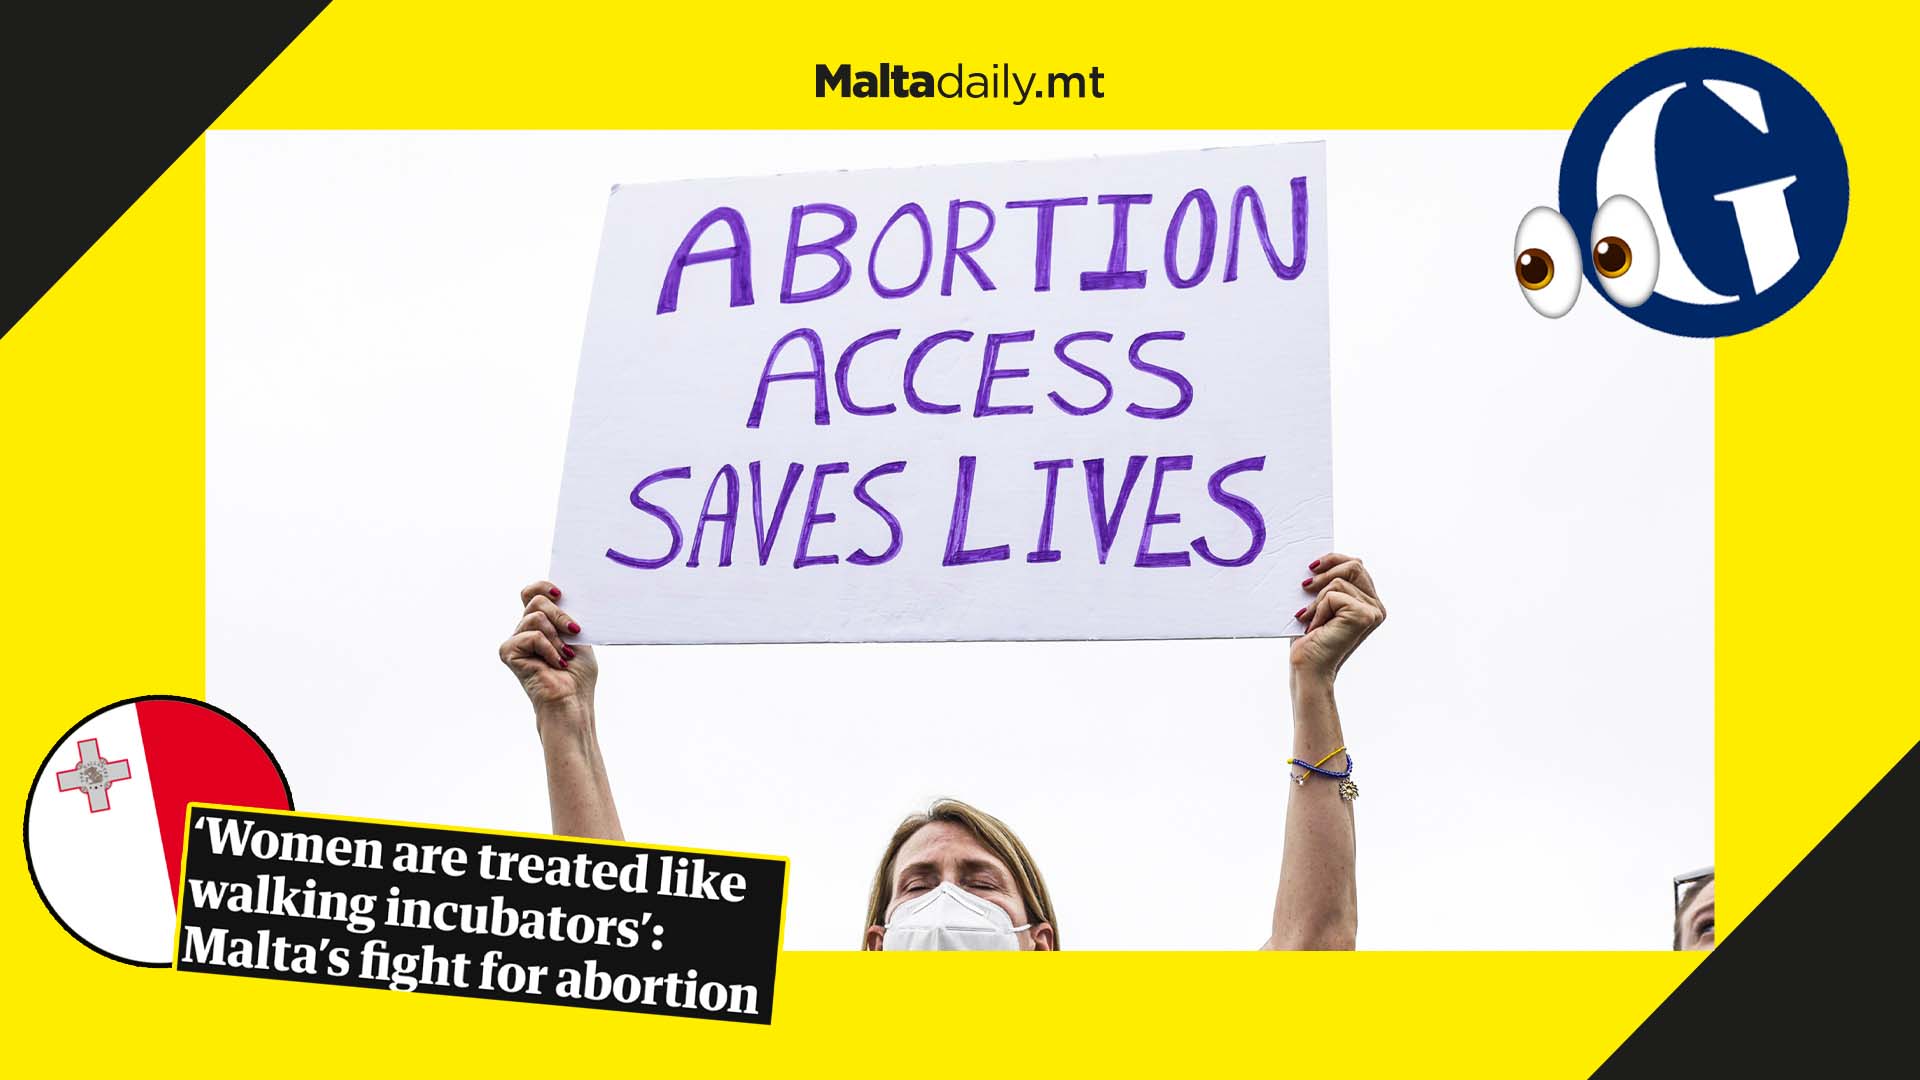 Malta’s abortion ban covered by international news site The Guardian